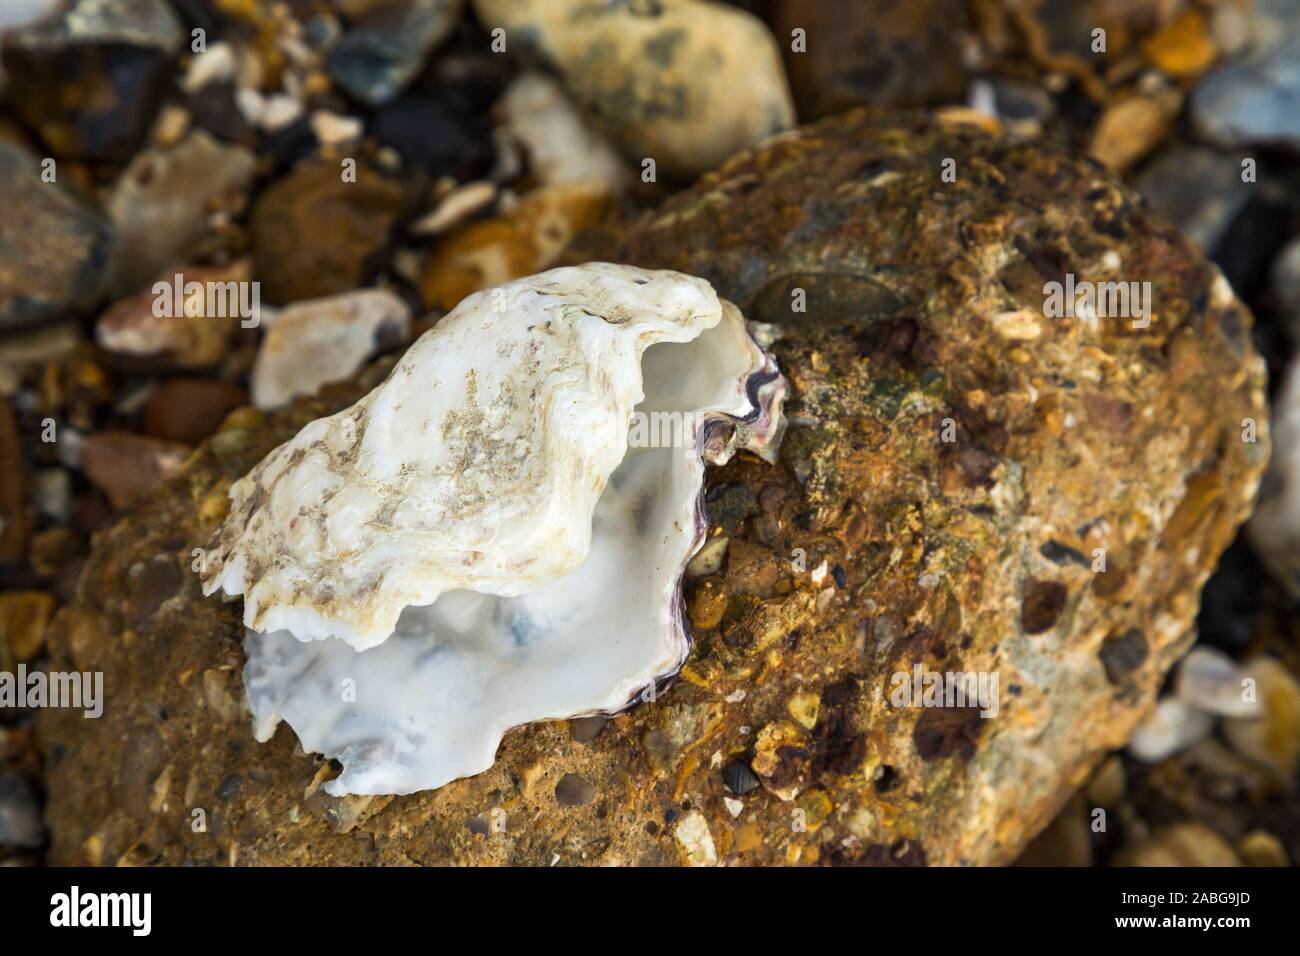 An open an empty shellfish shell which is attached to a piece of old eroded concrete at the seashore. The shell is perhaps an old oyster shell. UK (105) Stock Photo